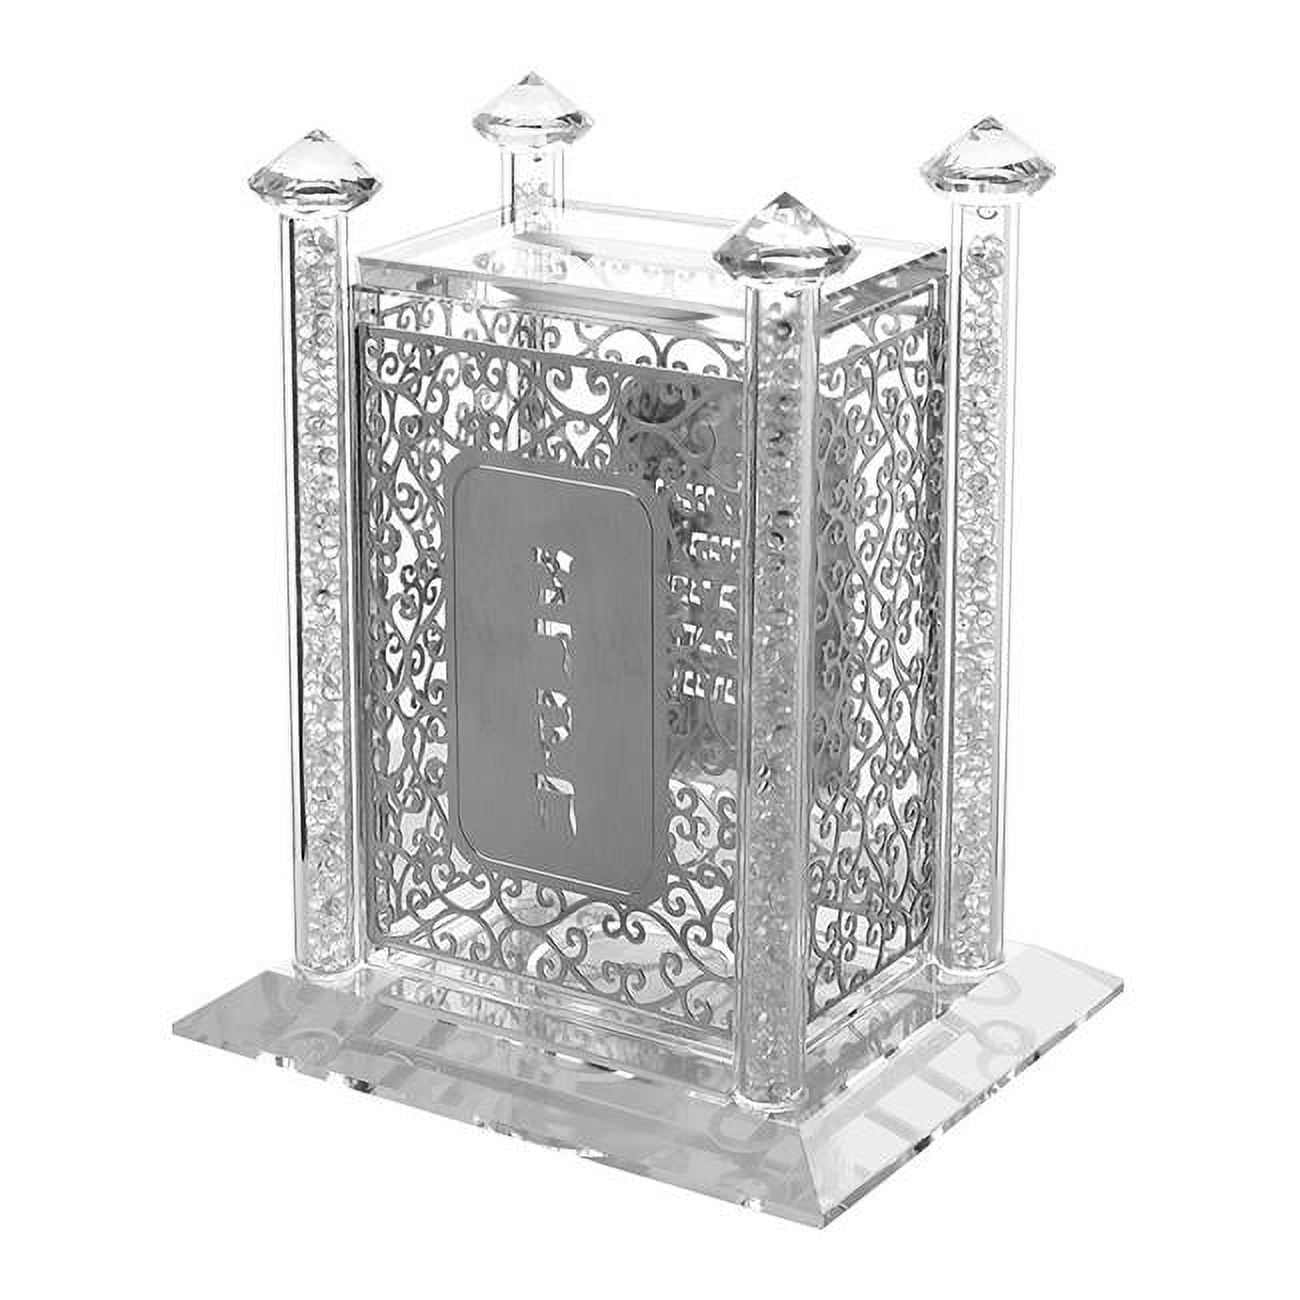 Picture of A&M Judaica & Gifts 15695 4 x 3 x 3.5 in. Crystal Tzedakah Pushka Box with Silver Design